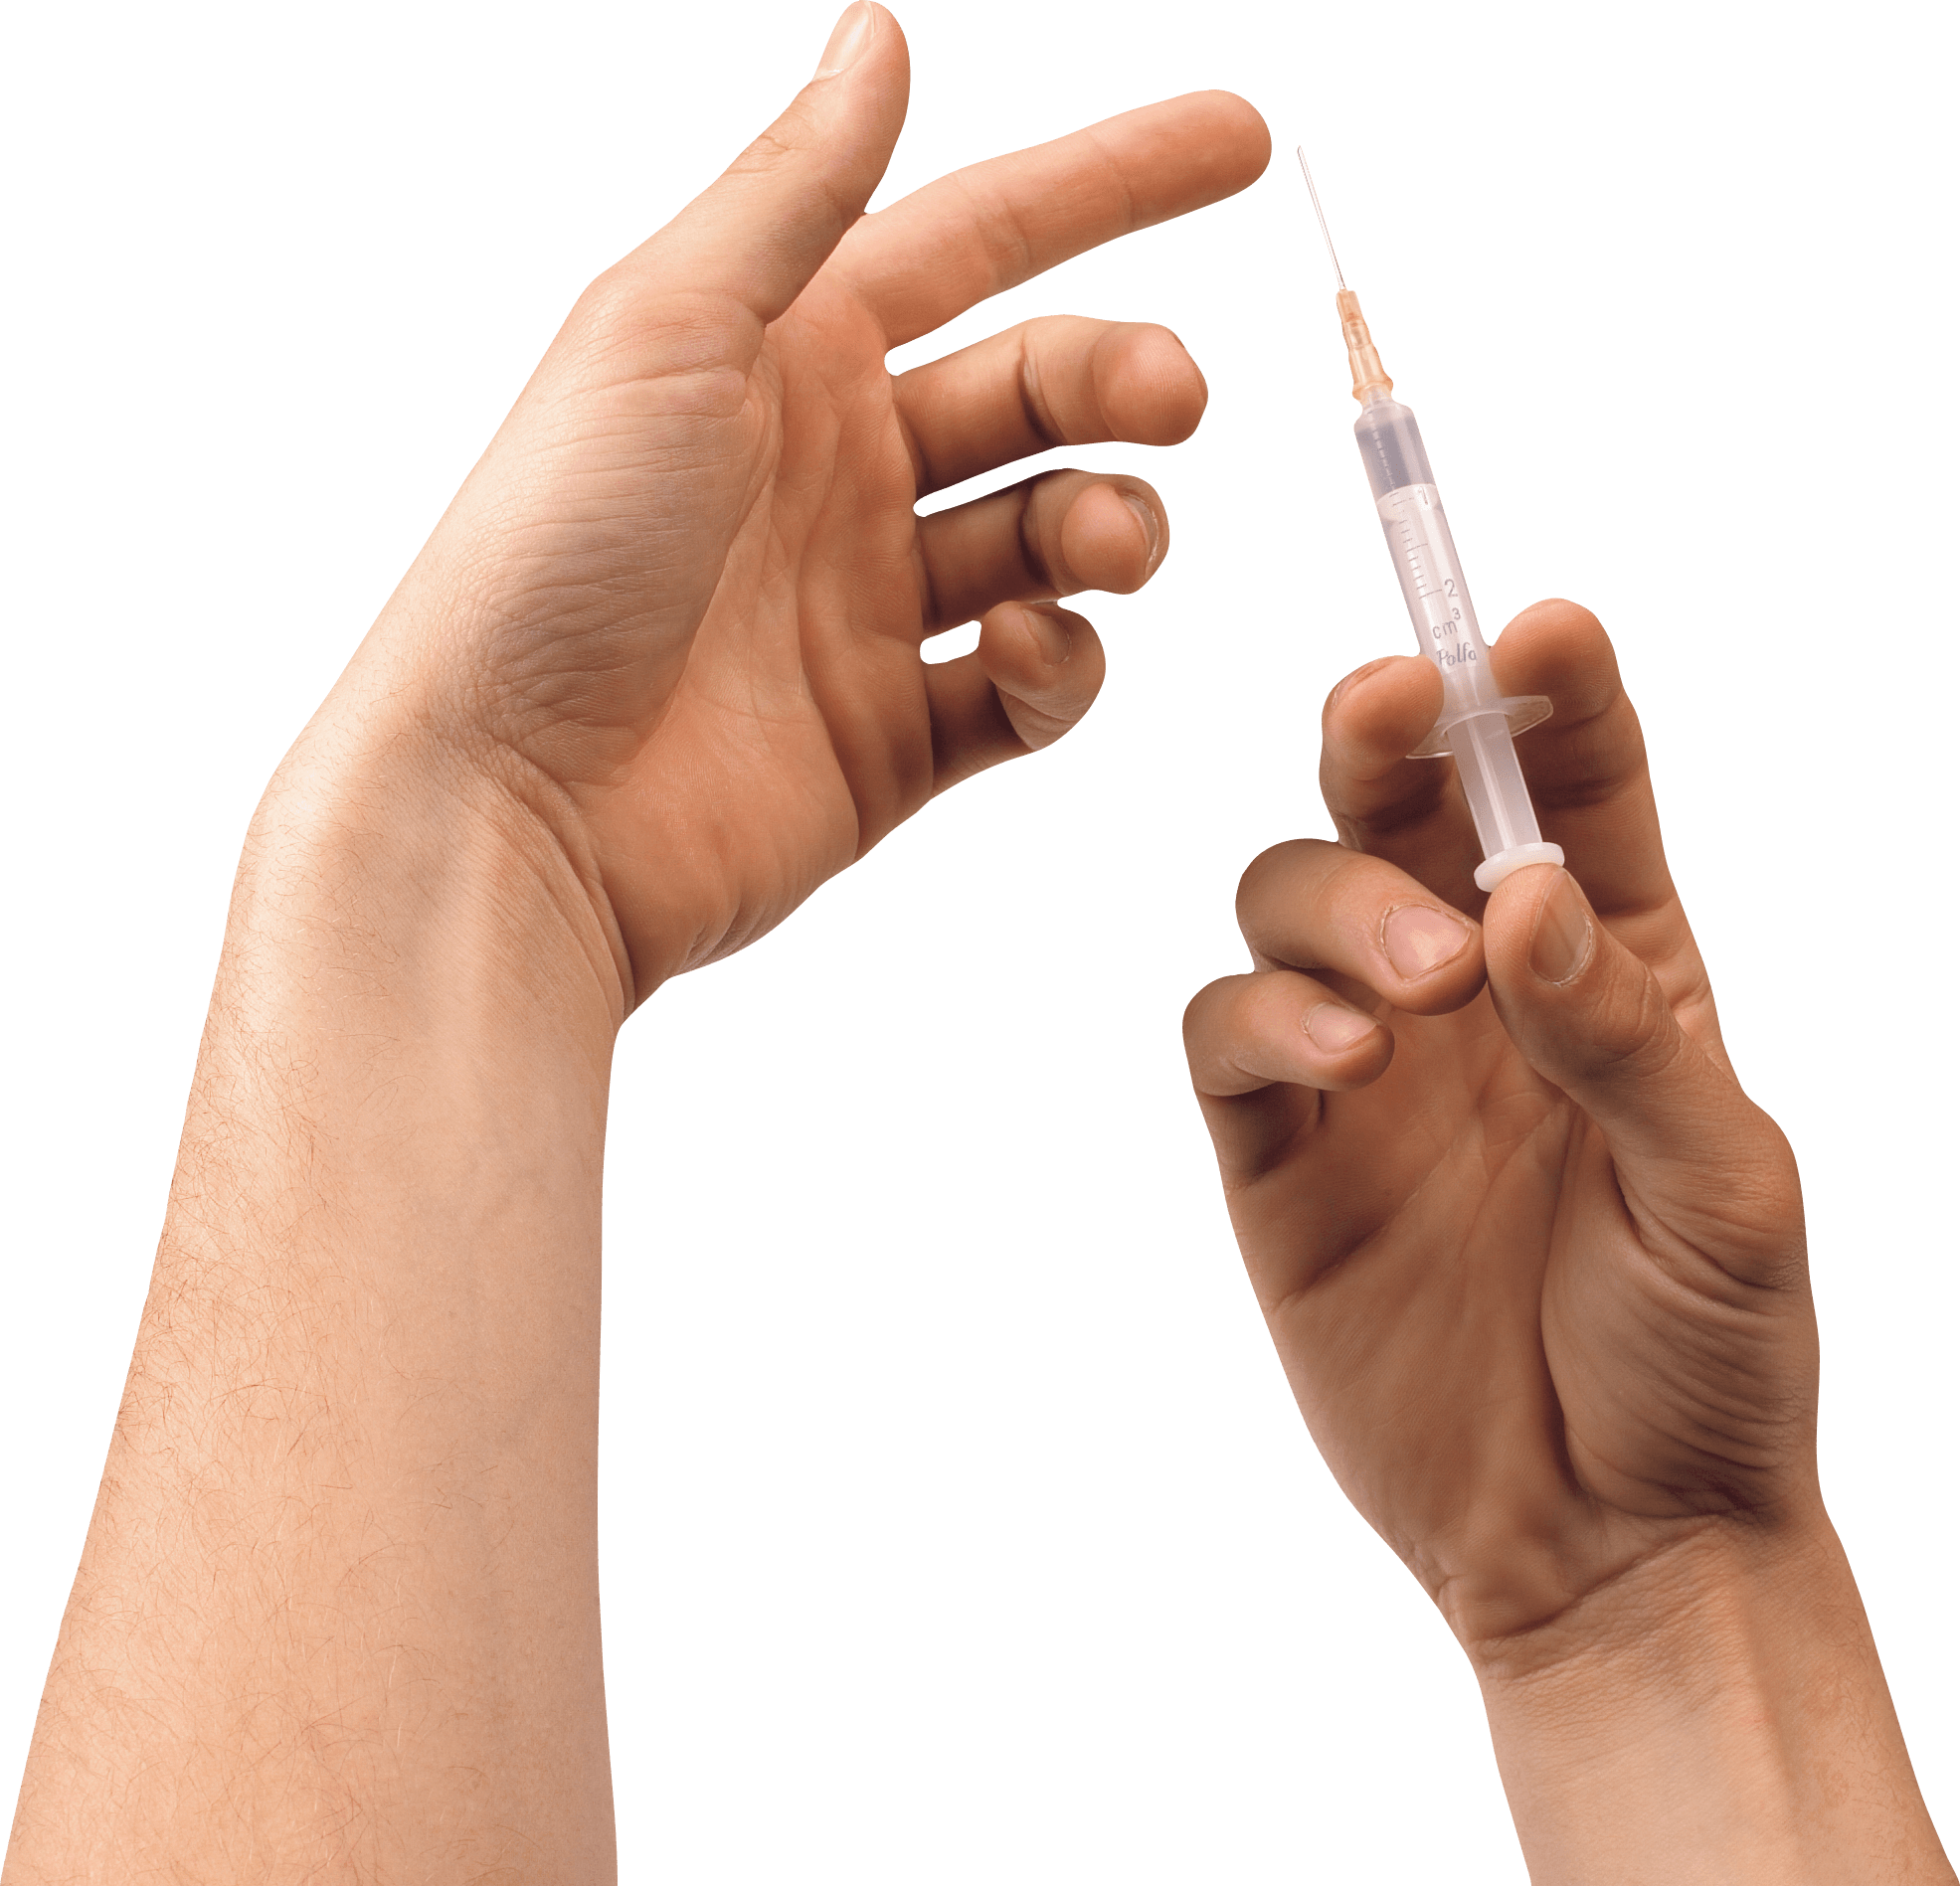 A Person Holding A Syringe